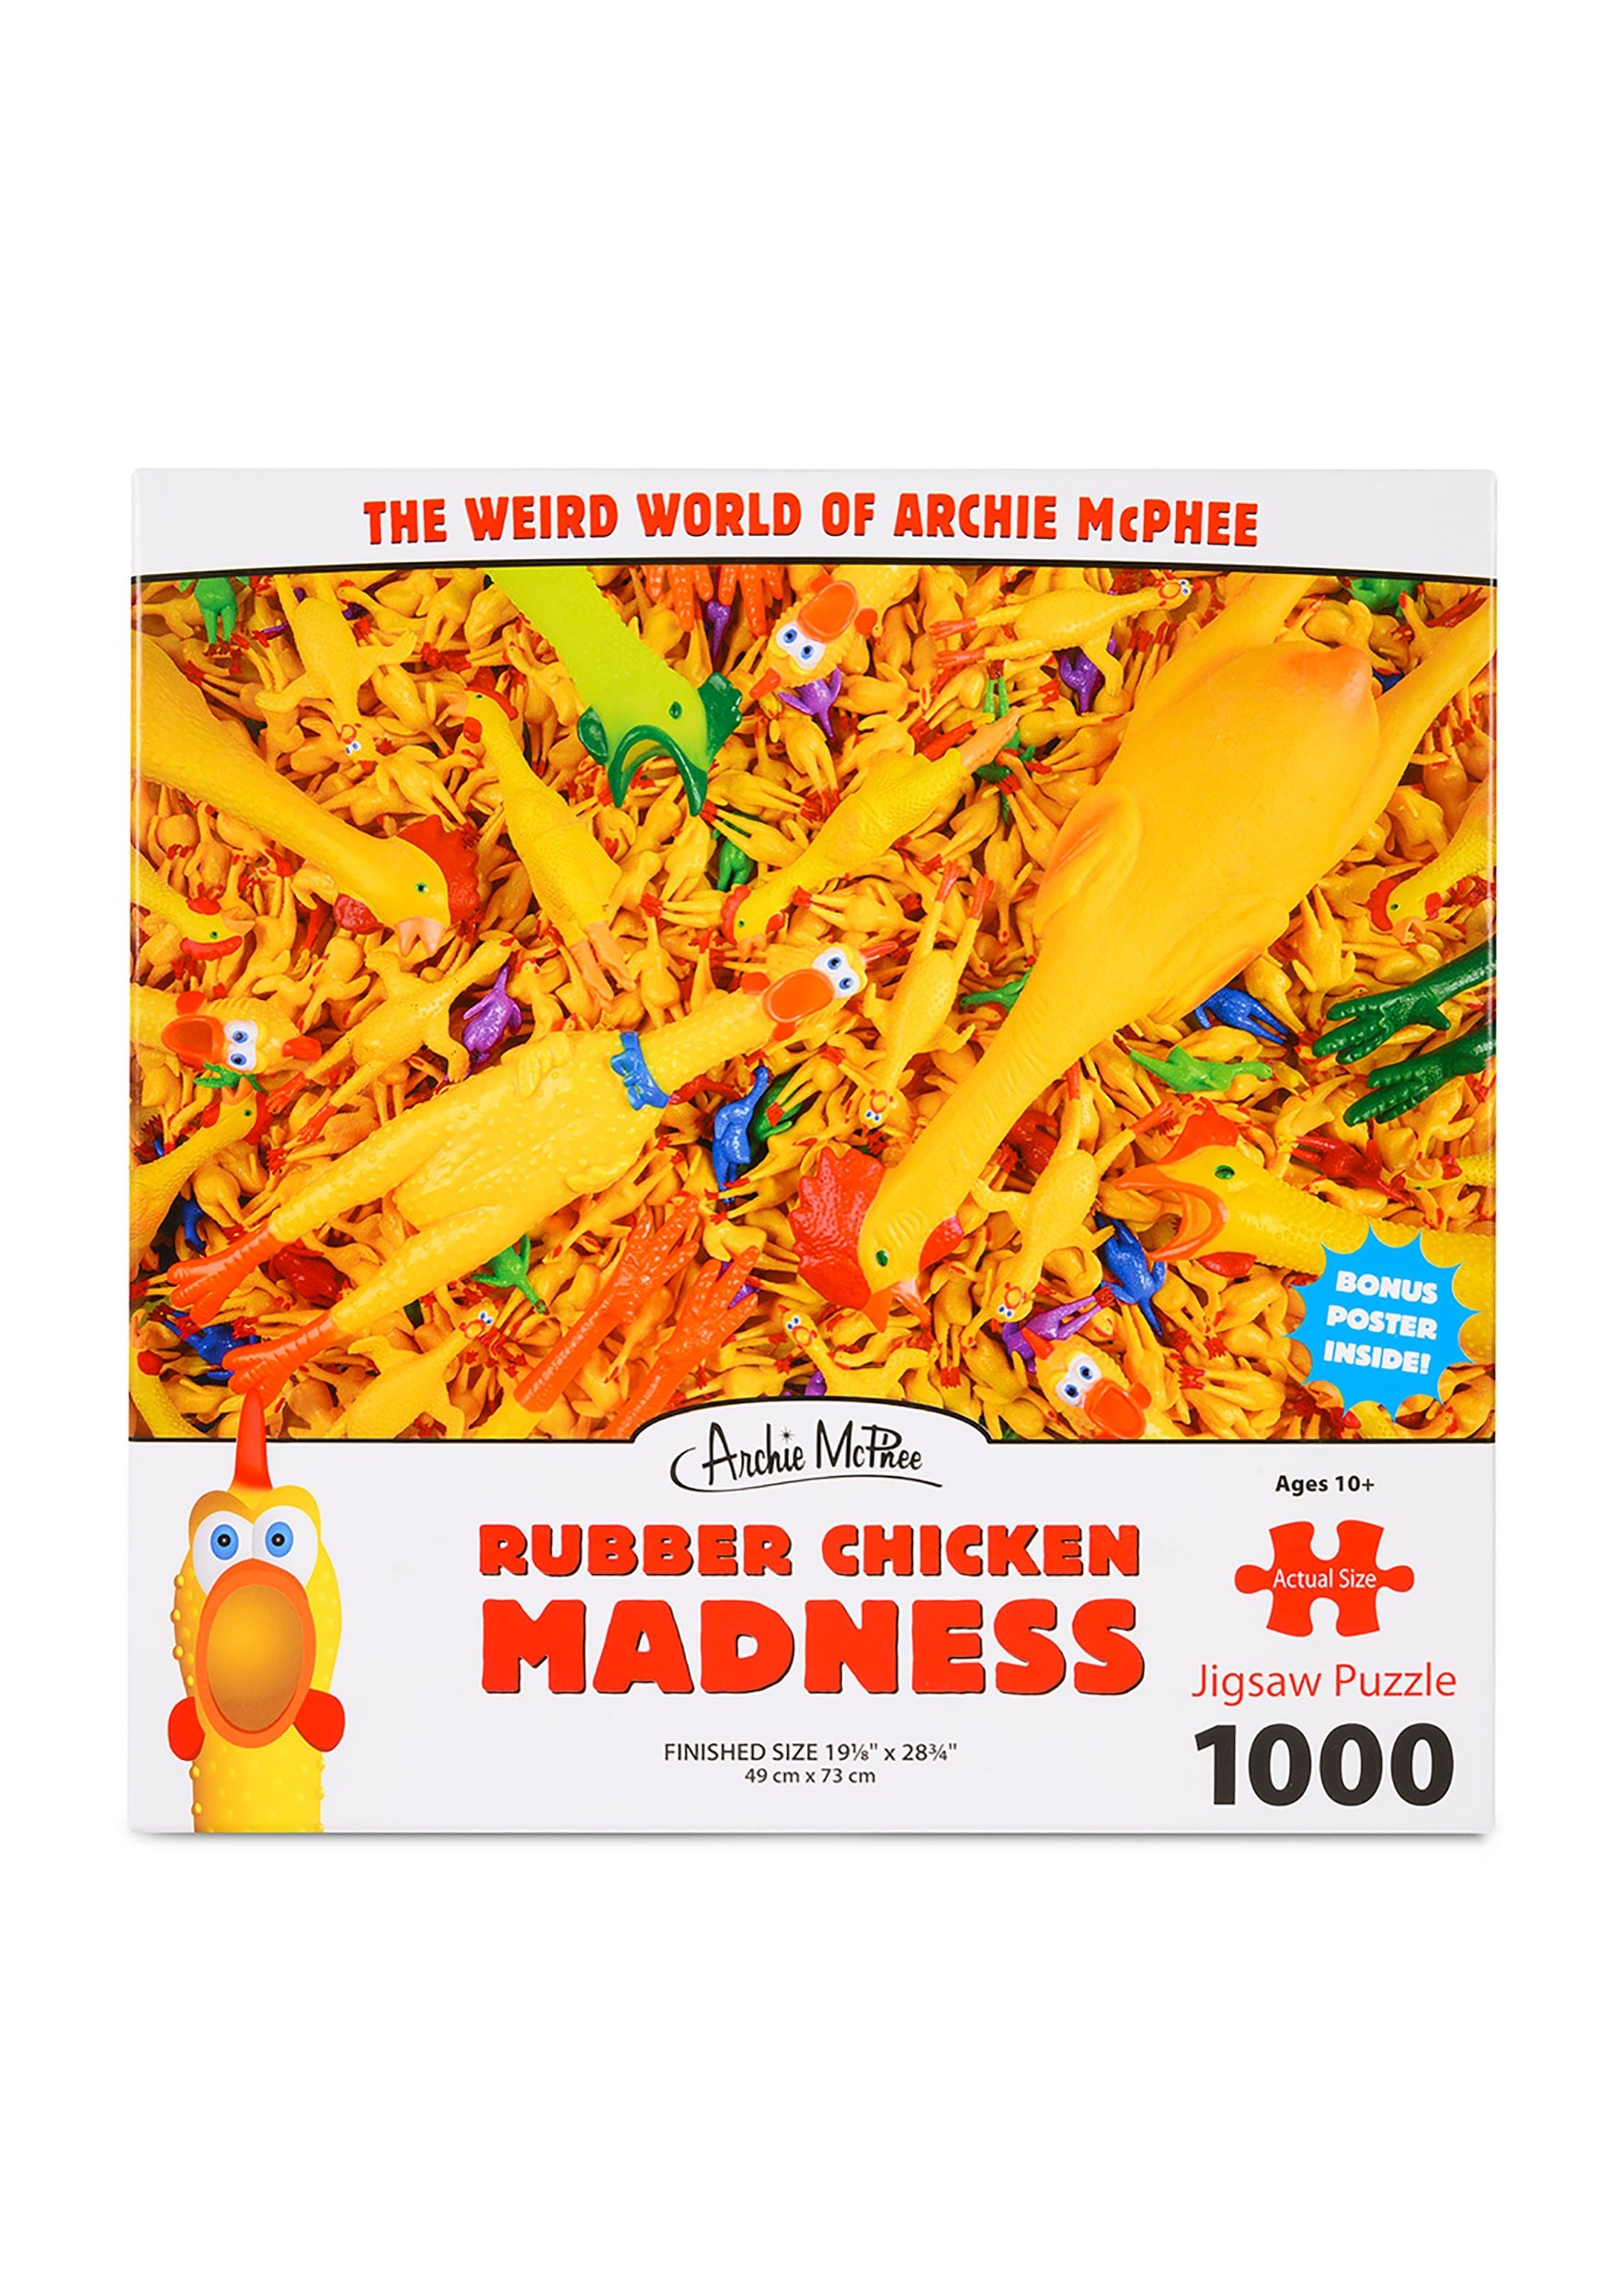 1000-Piece Rubber Chicken Madness Jigsaw Puzzle